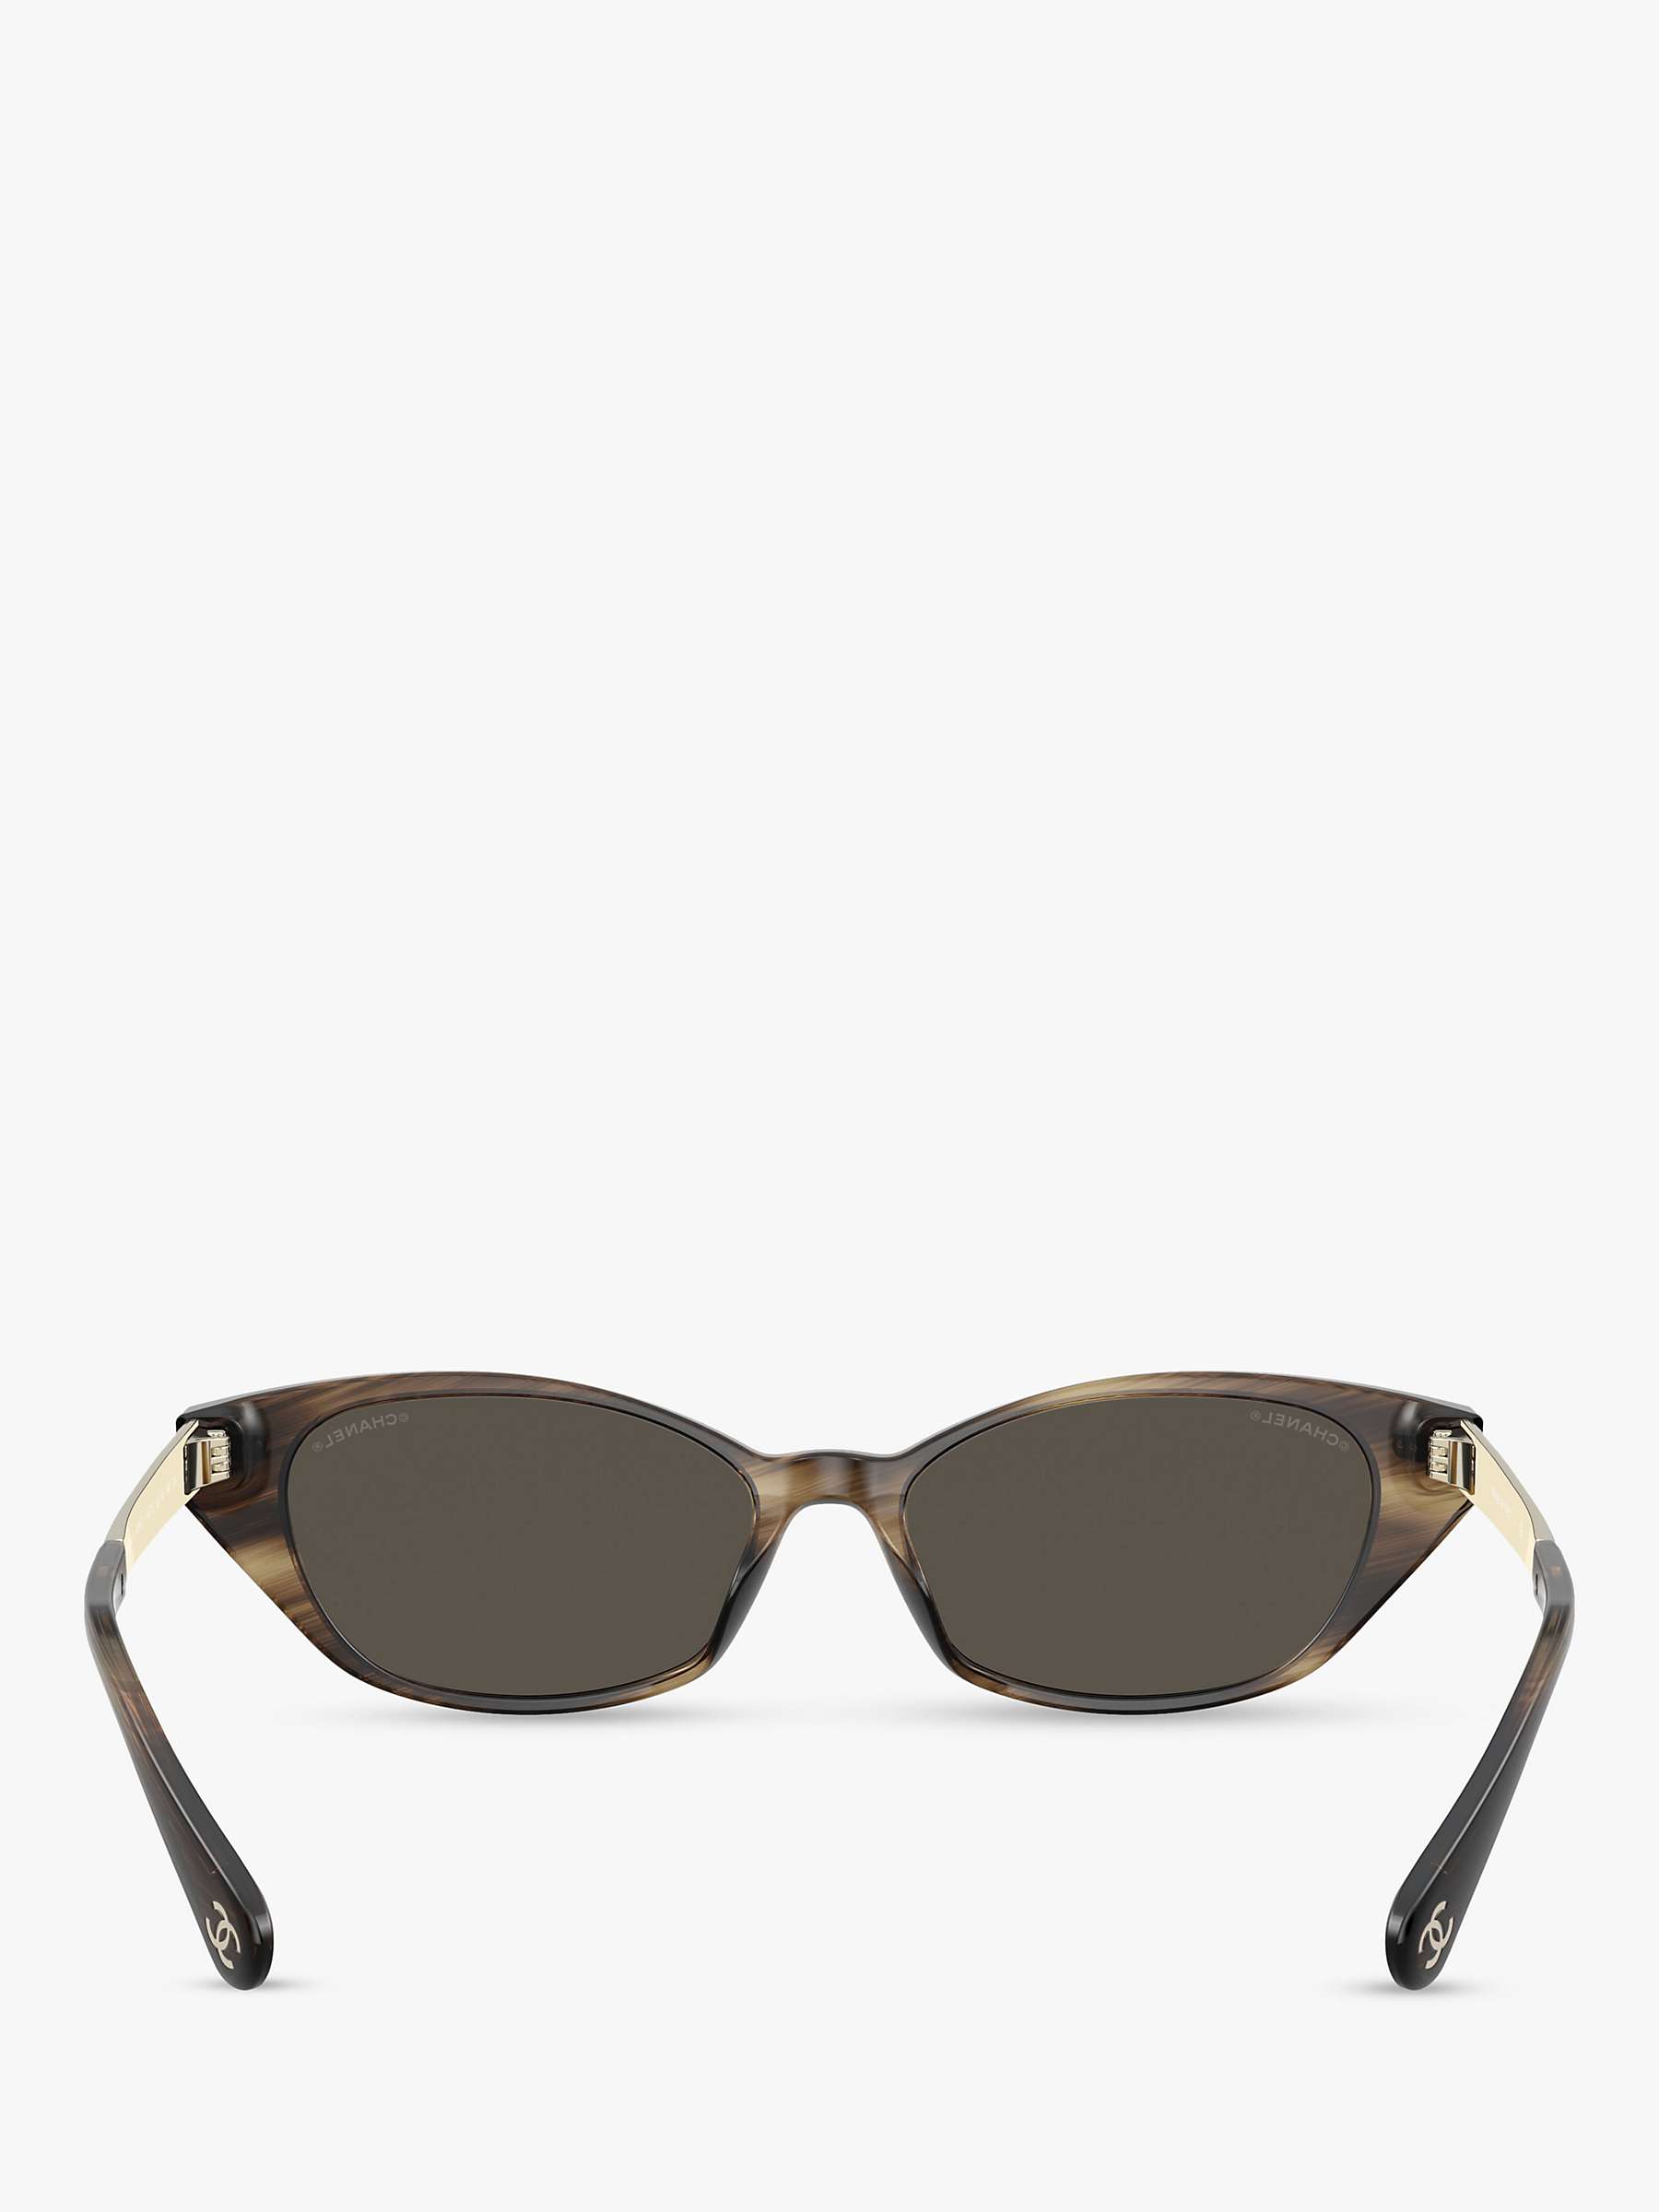 Buy CHANEL Cat's Eye Sunglasses CH5438Q Striped Brown Online at johnlewis.com